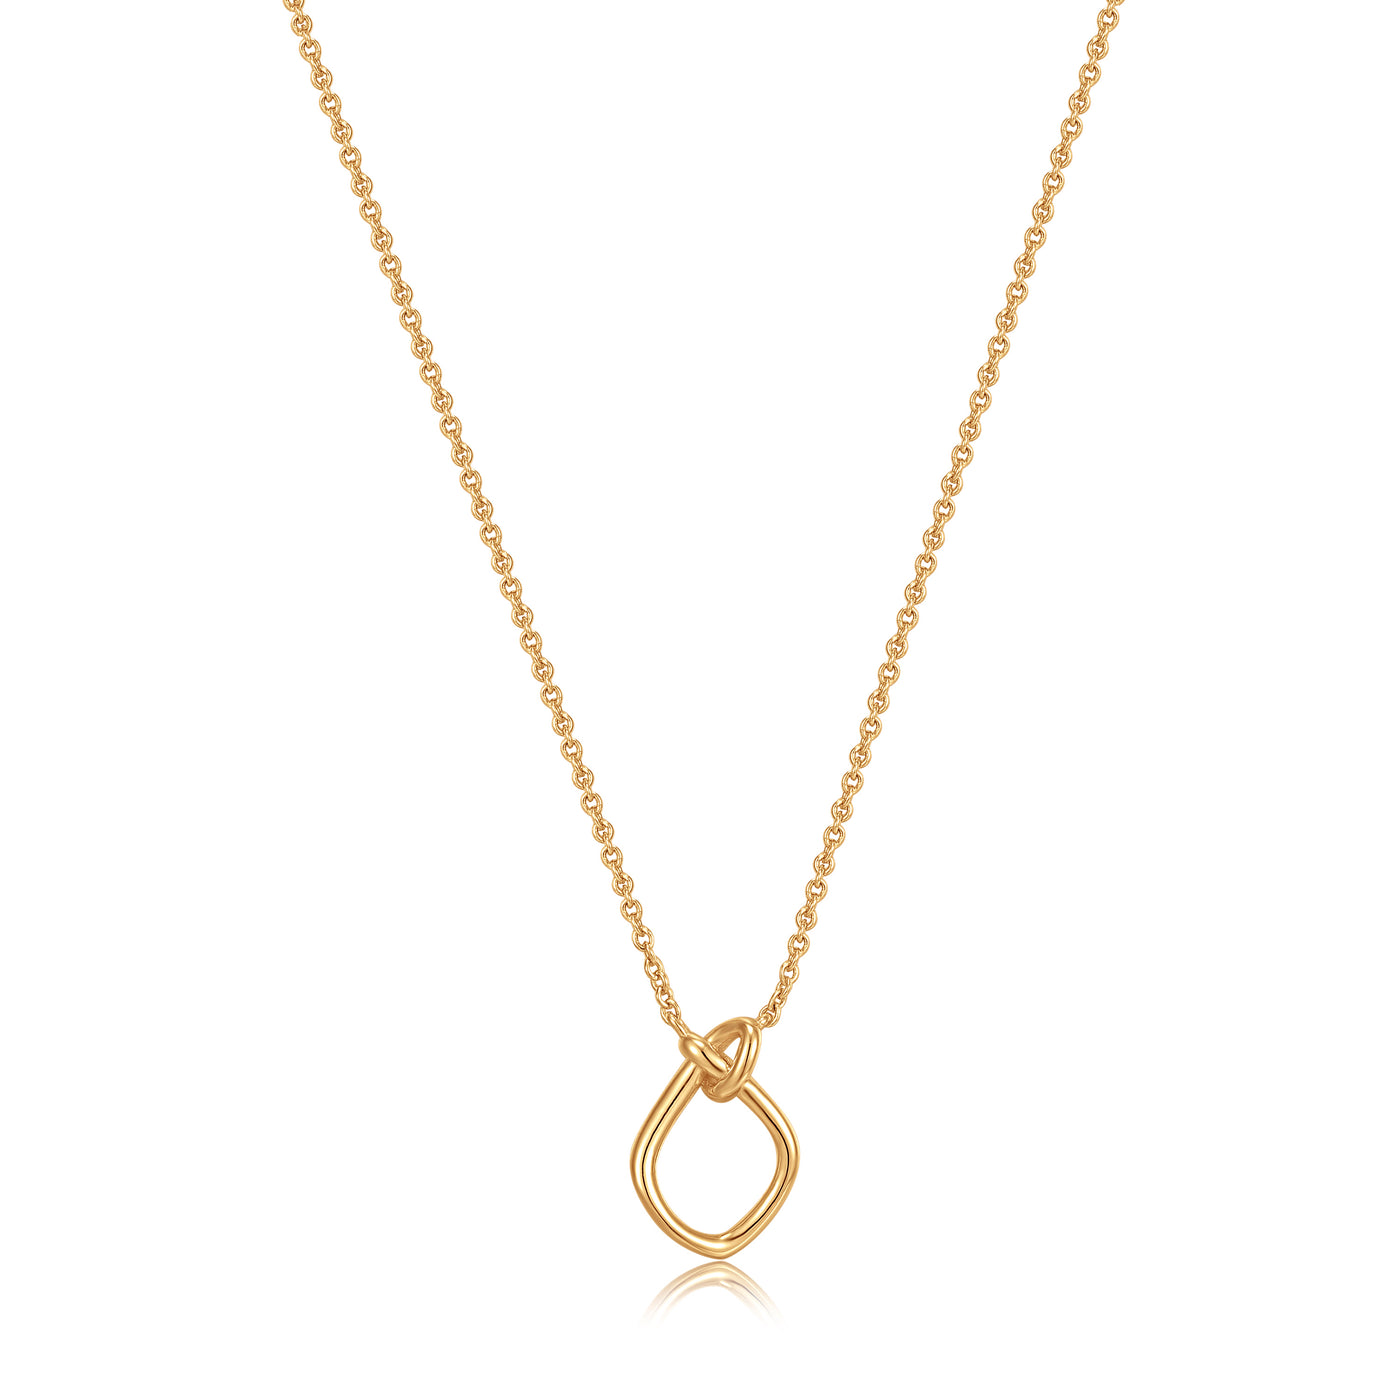 Ania Haie Gold Knot Pendant Necklace-Necklaces-Chic Pistachio-Market Street Nest, Fashionable Clothing, Shoes and Home Décor Located in Mabank, TX